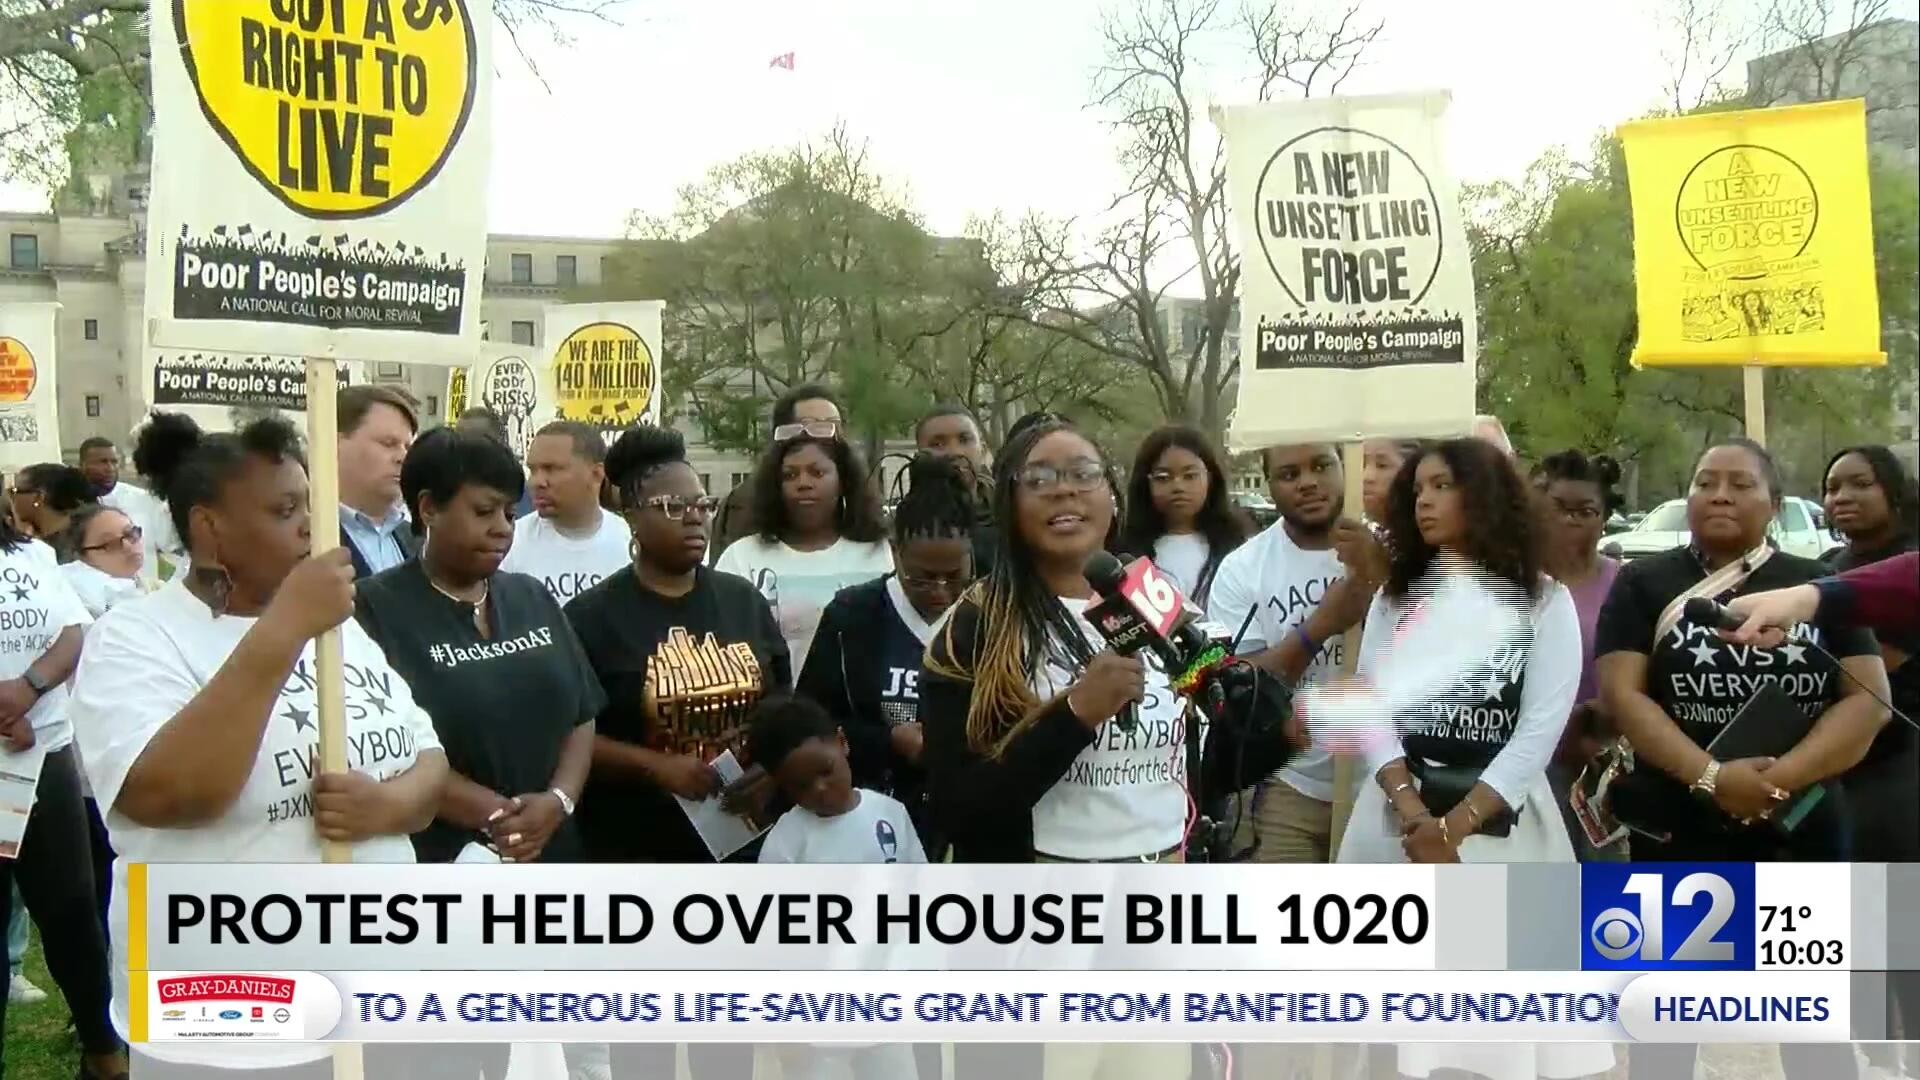 Protest-held-over-House-Bill-1020-in-Jackson